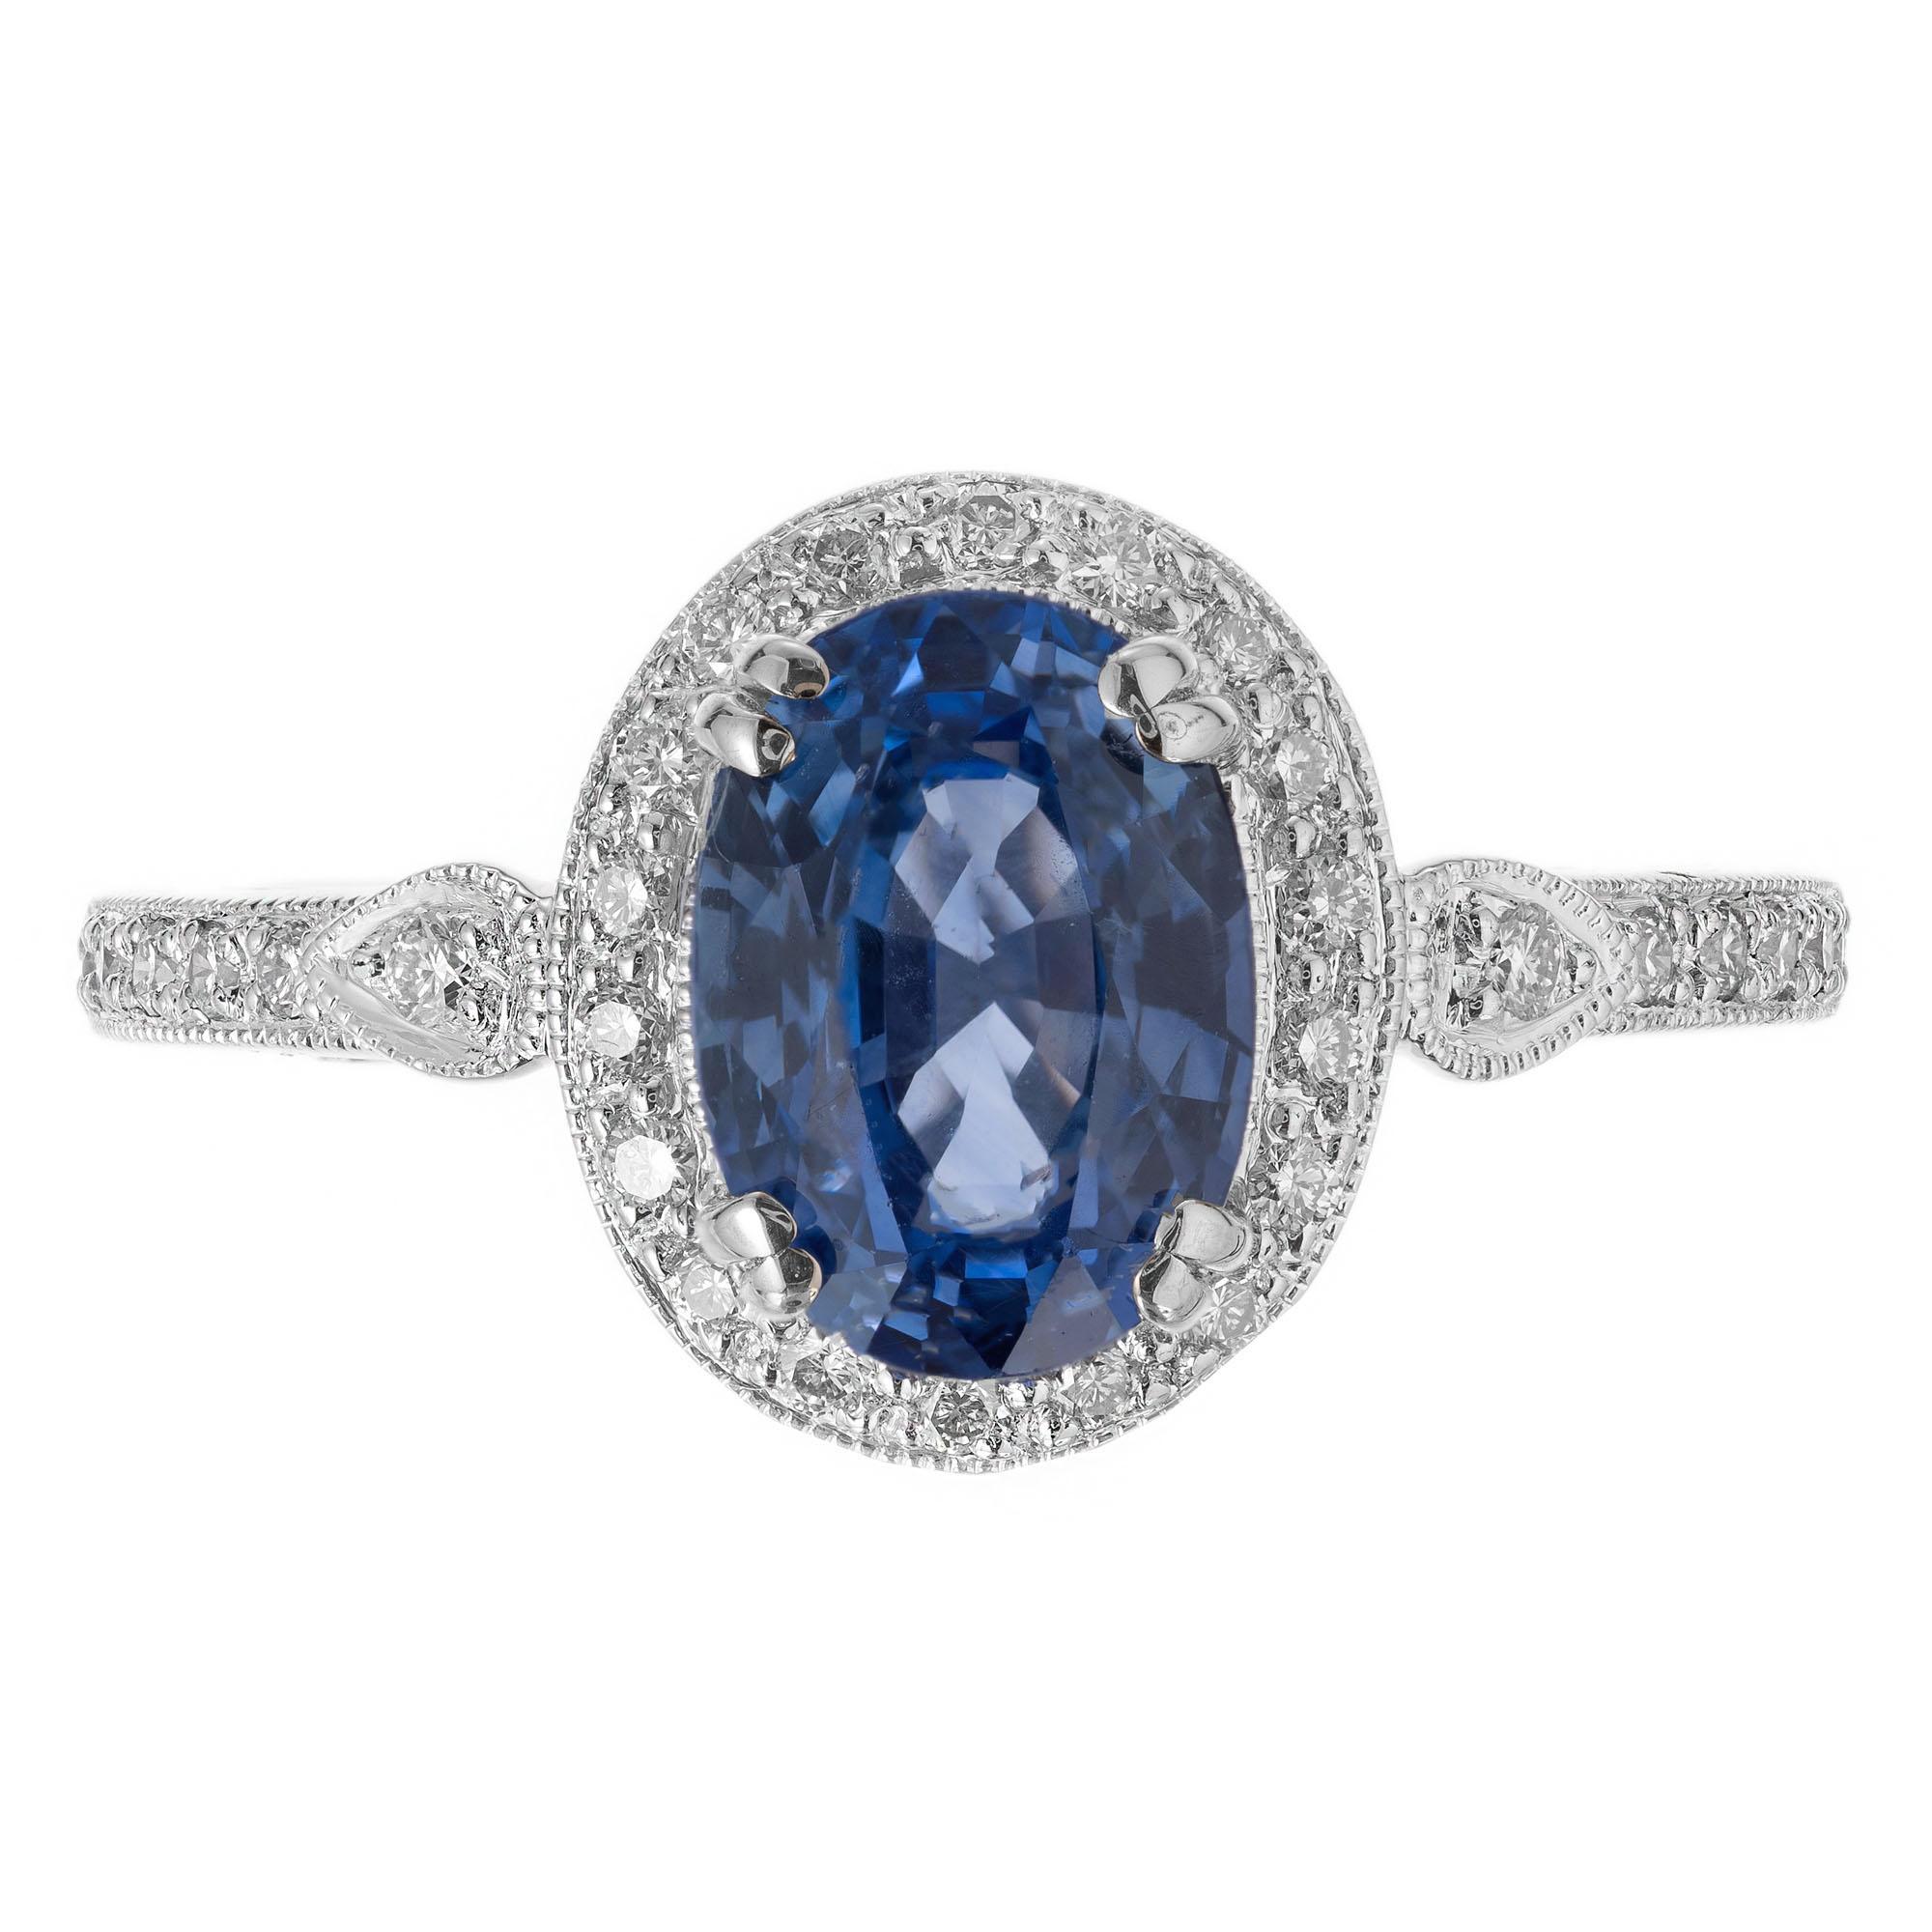 Sapphire and diamond engagement ring. Oval center sapphire with a halo of round diamonds. 18k white gold setting with micro pave set round accent diamonds along the shank. GIA certified # 5212550272

1 oval Ceylon Sapphire 2.47ct  8.81 by 6.20 by